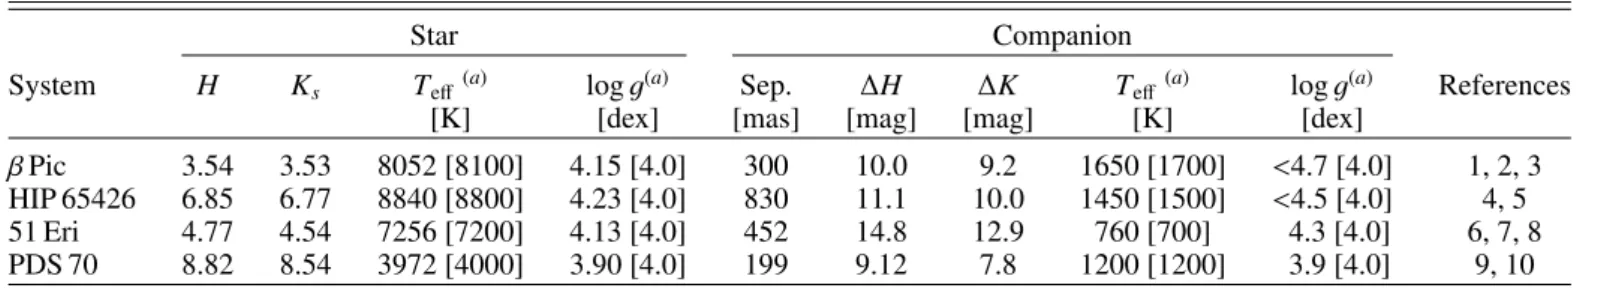 Table 2. Planetary system parameters used as input for simulations.